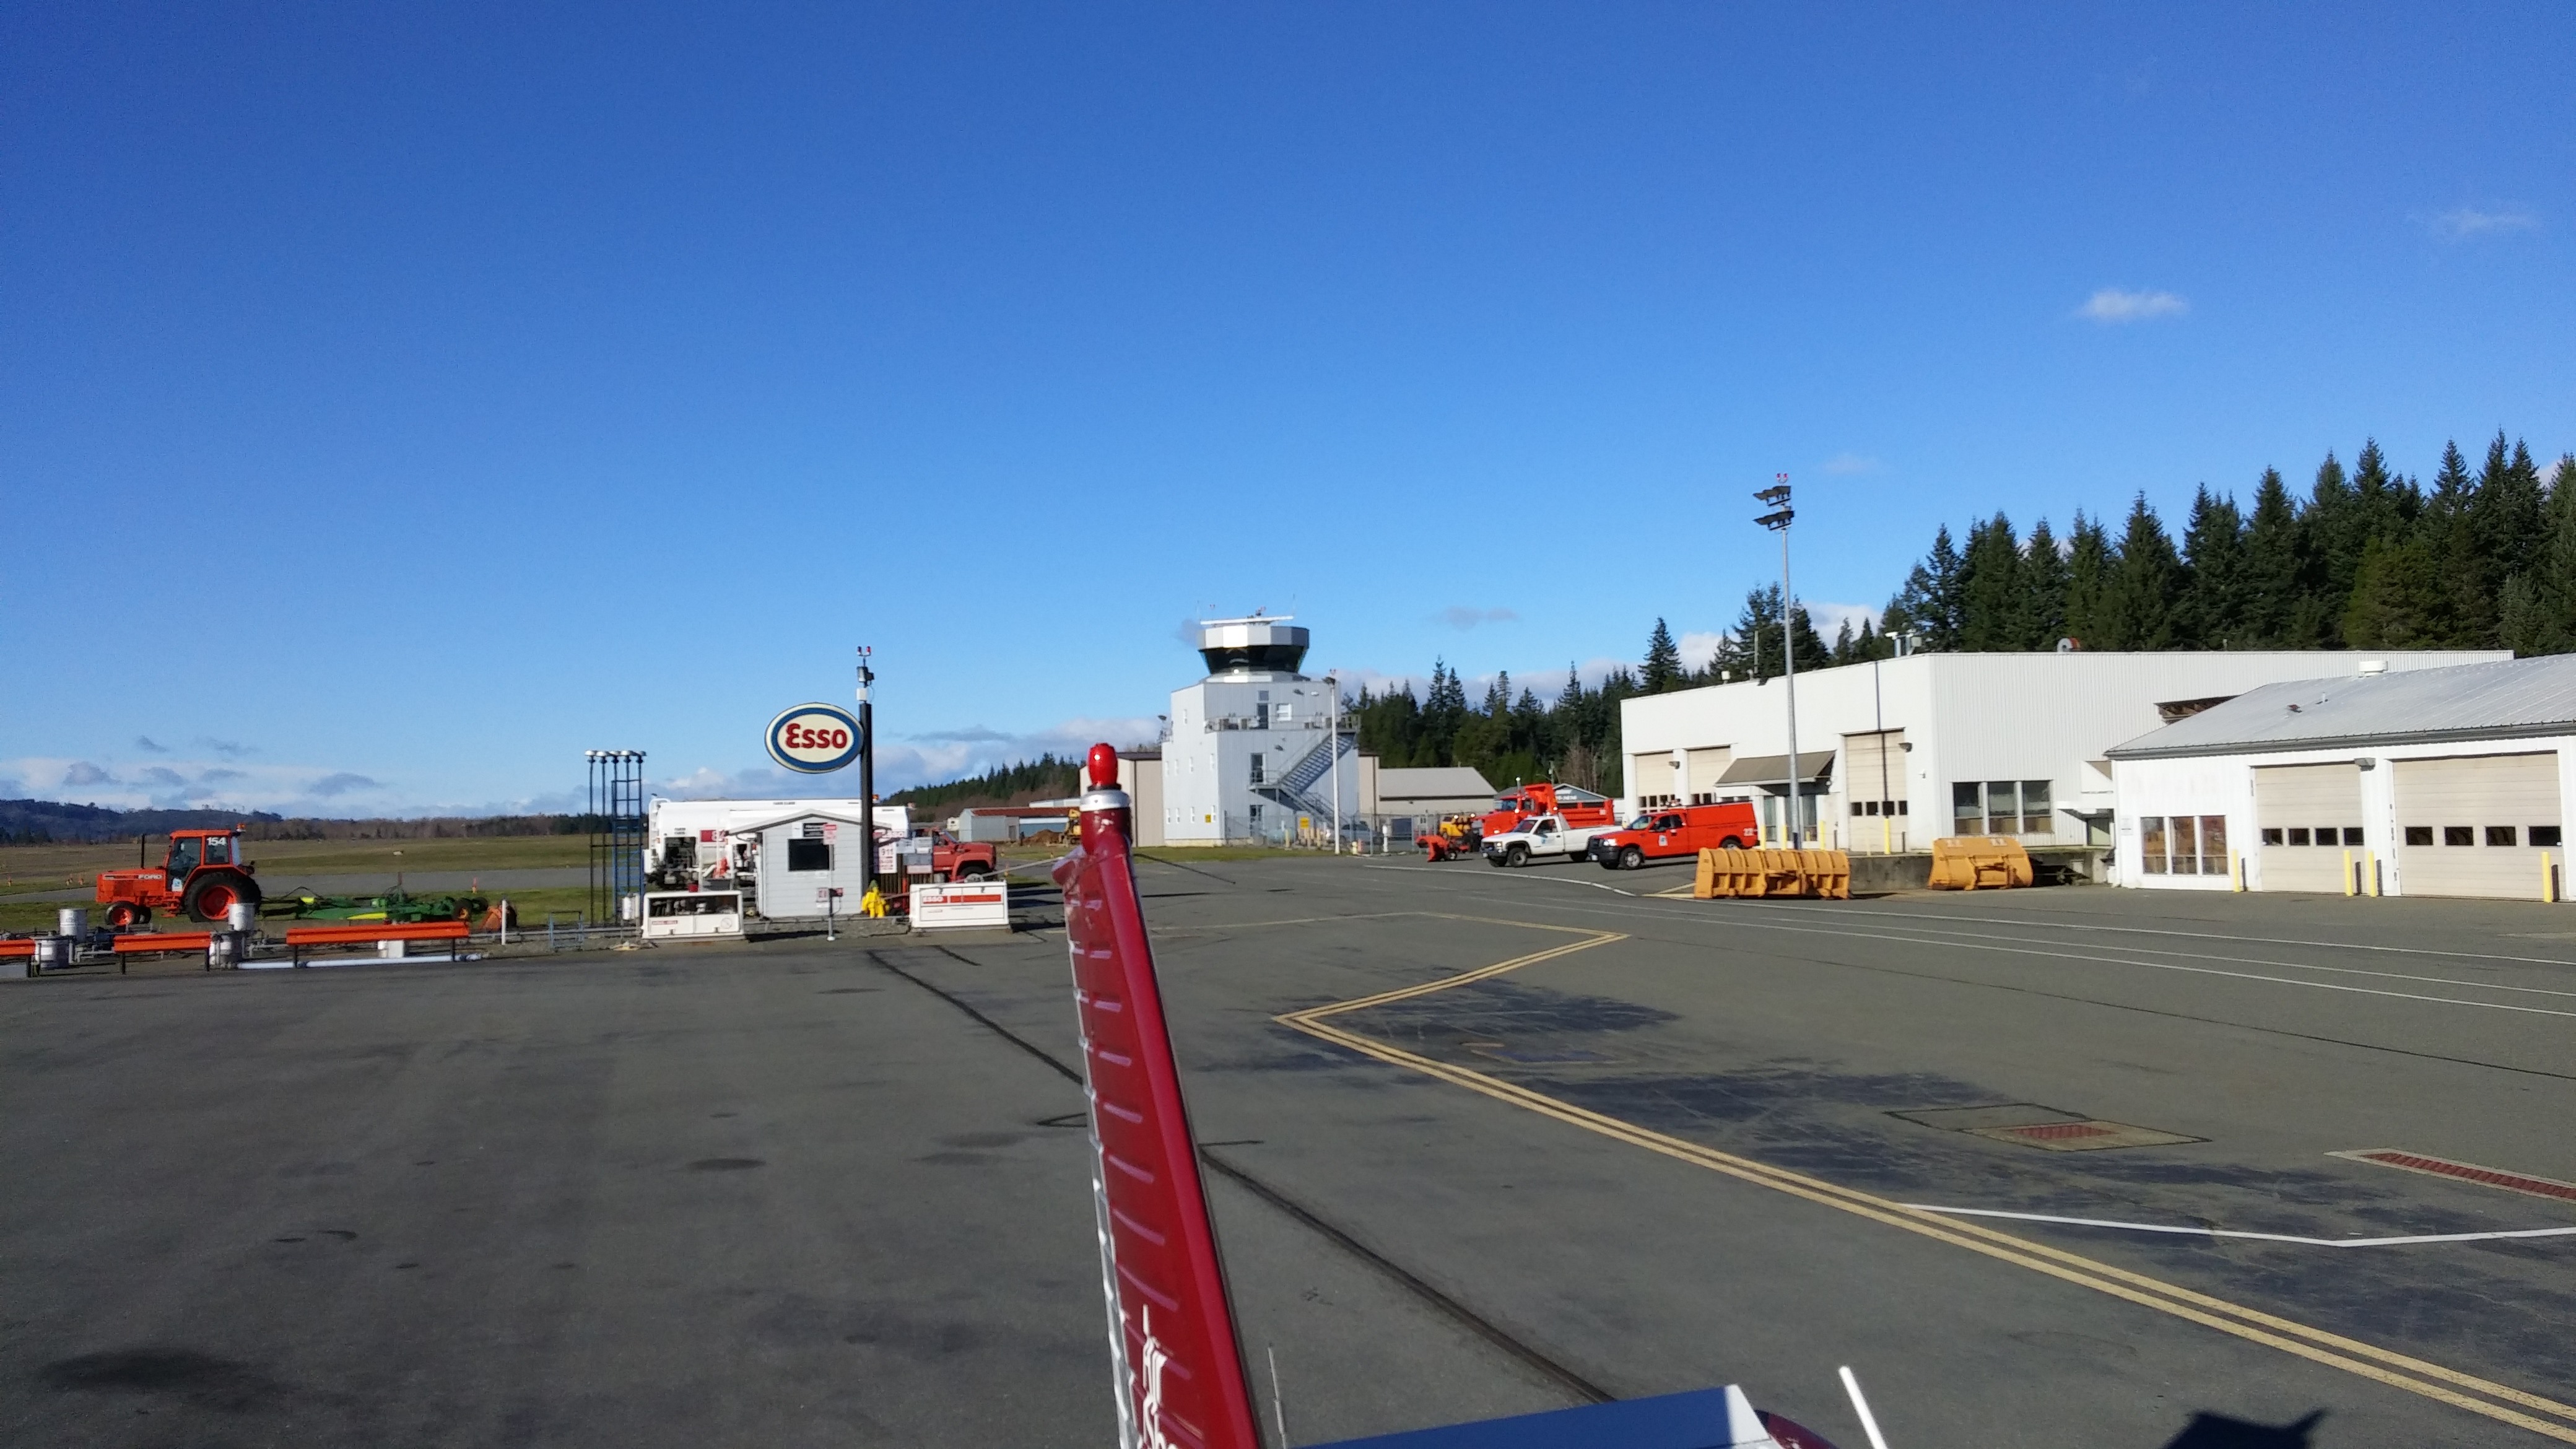 The tower at CYBL. Note there isn’t an ATC unit here, just Campbell River Radio.